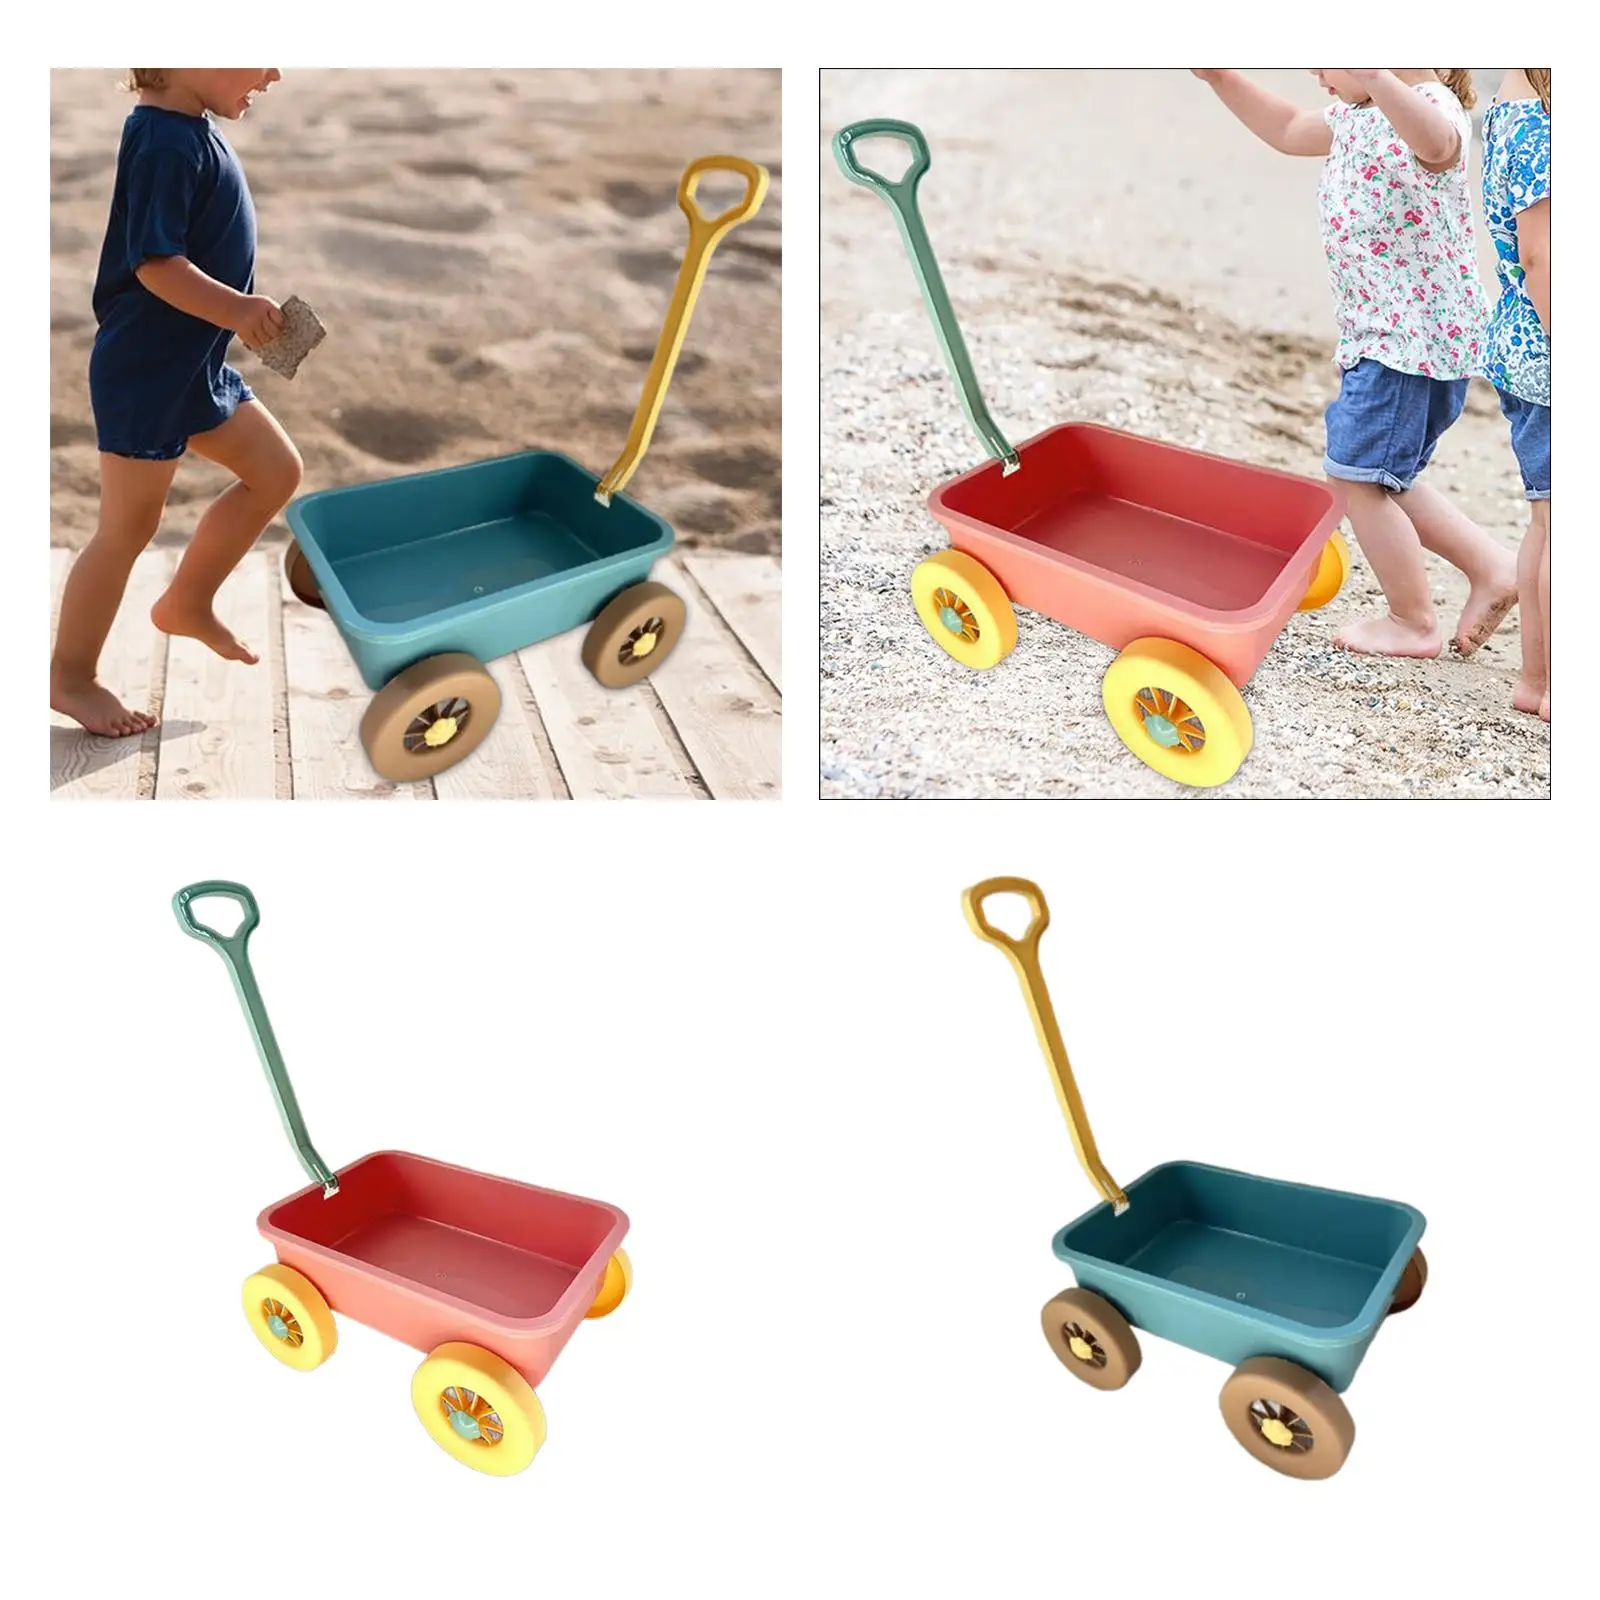 Pretend Play Wagon Sand Toy Practical Multiuse Play Motor Vehicles Beach Toy for Household Backyard Indoor Gardening Child